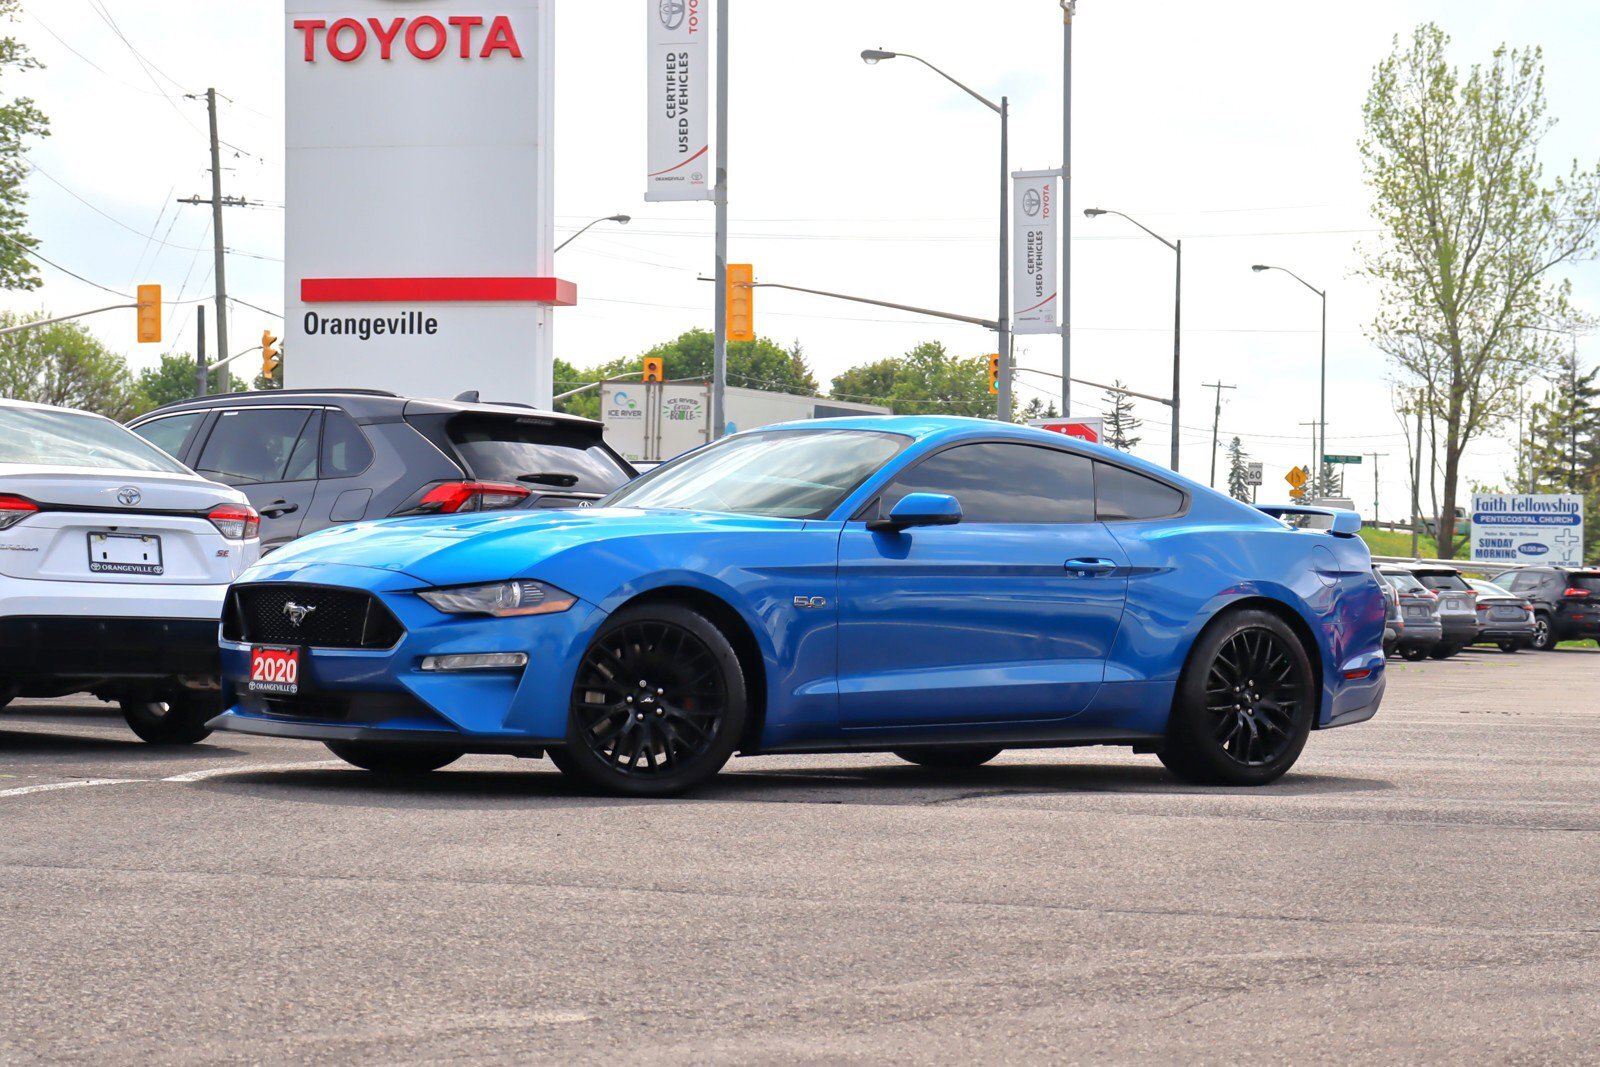 2020 Ford Mustang GT Premium, 5.0 V8, 6 Speed Manual